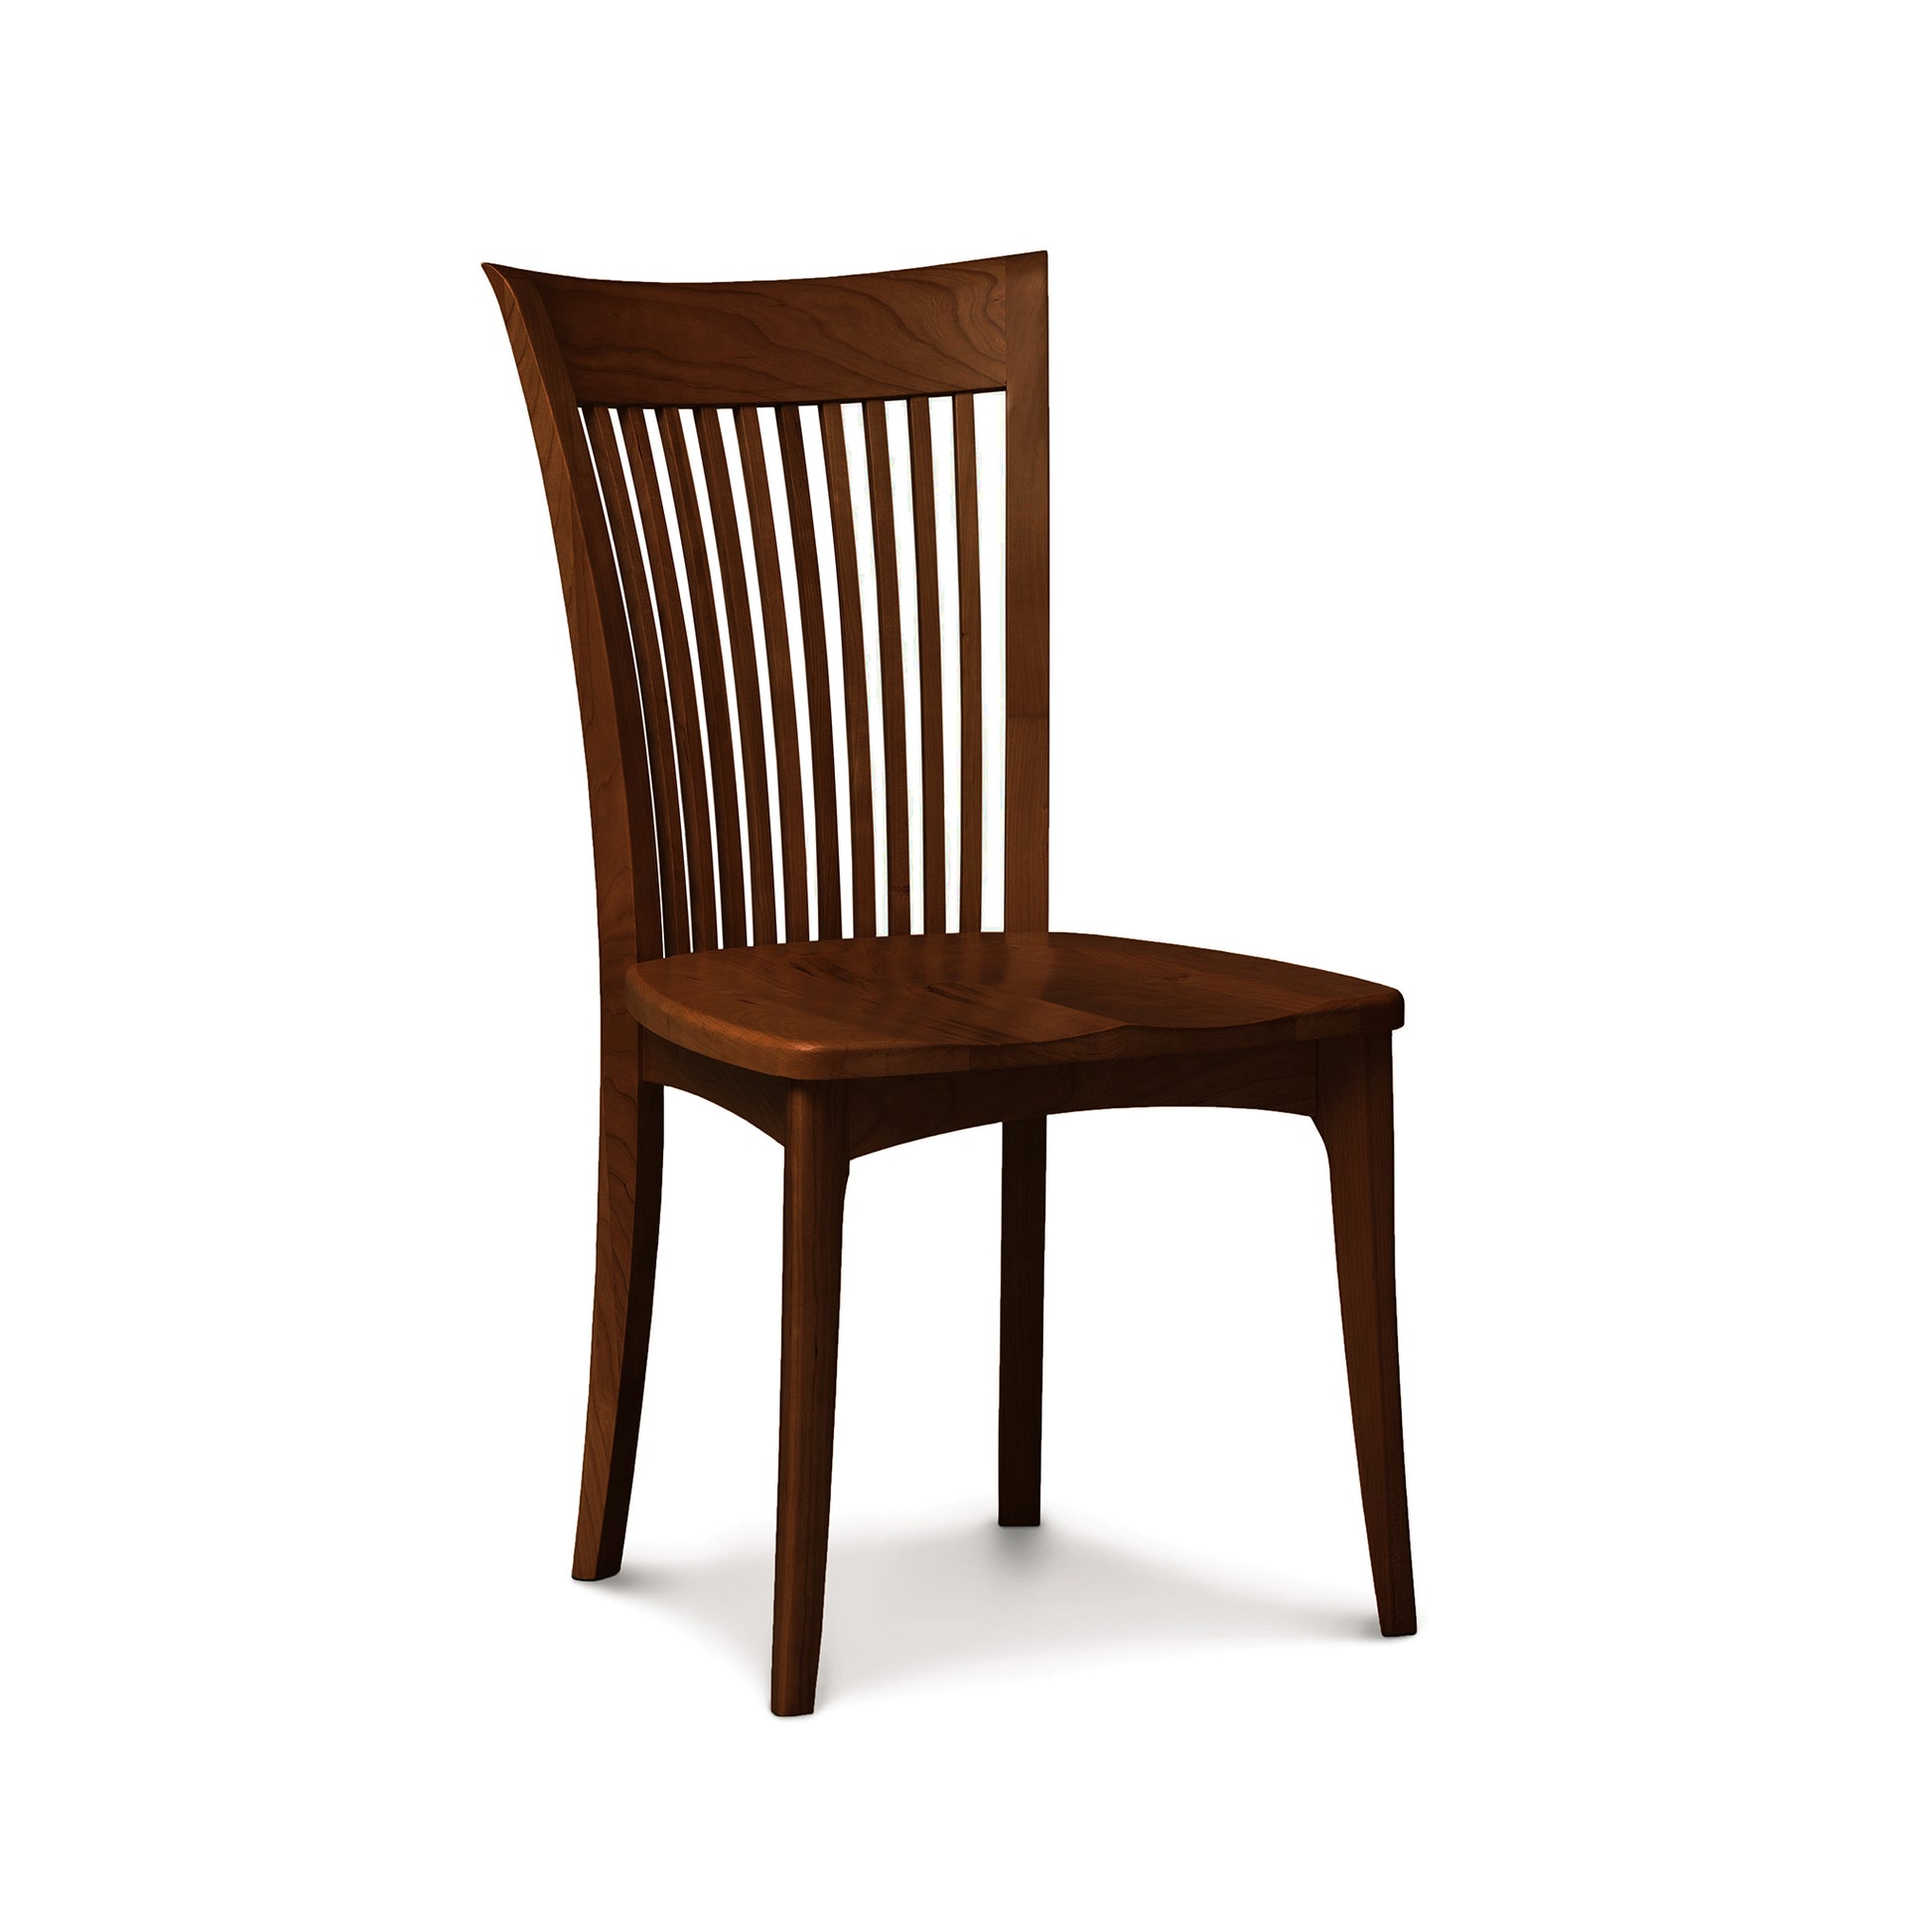 A solid Copeland Furniture Sarah Shaker Cherry Chair with Wooden Seat, displayed against a white background.